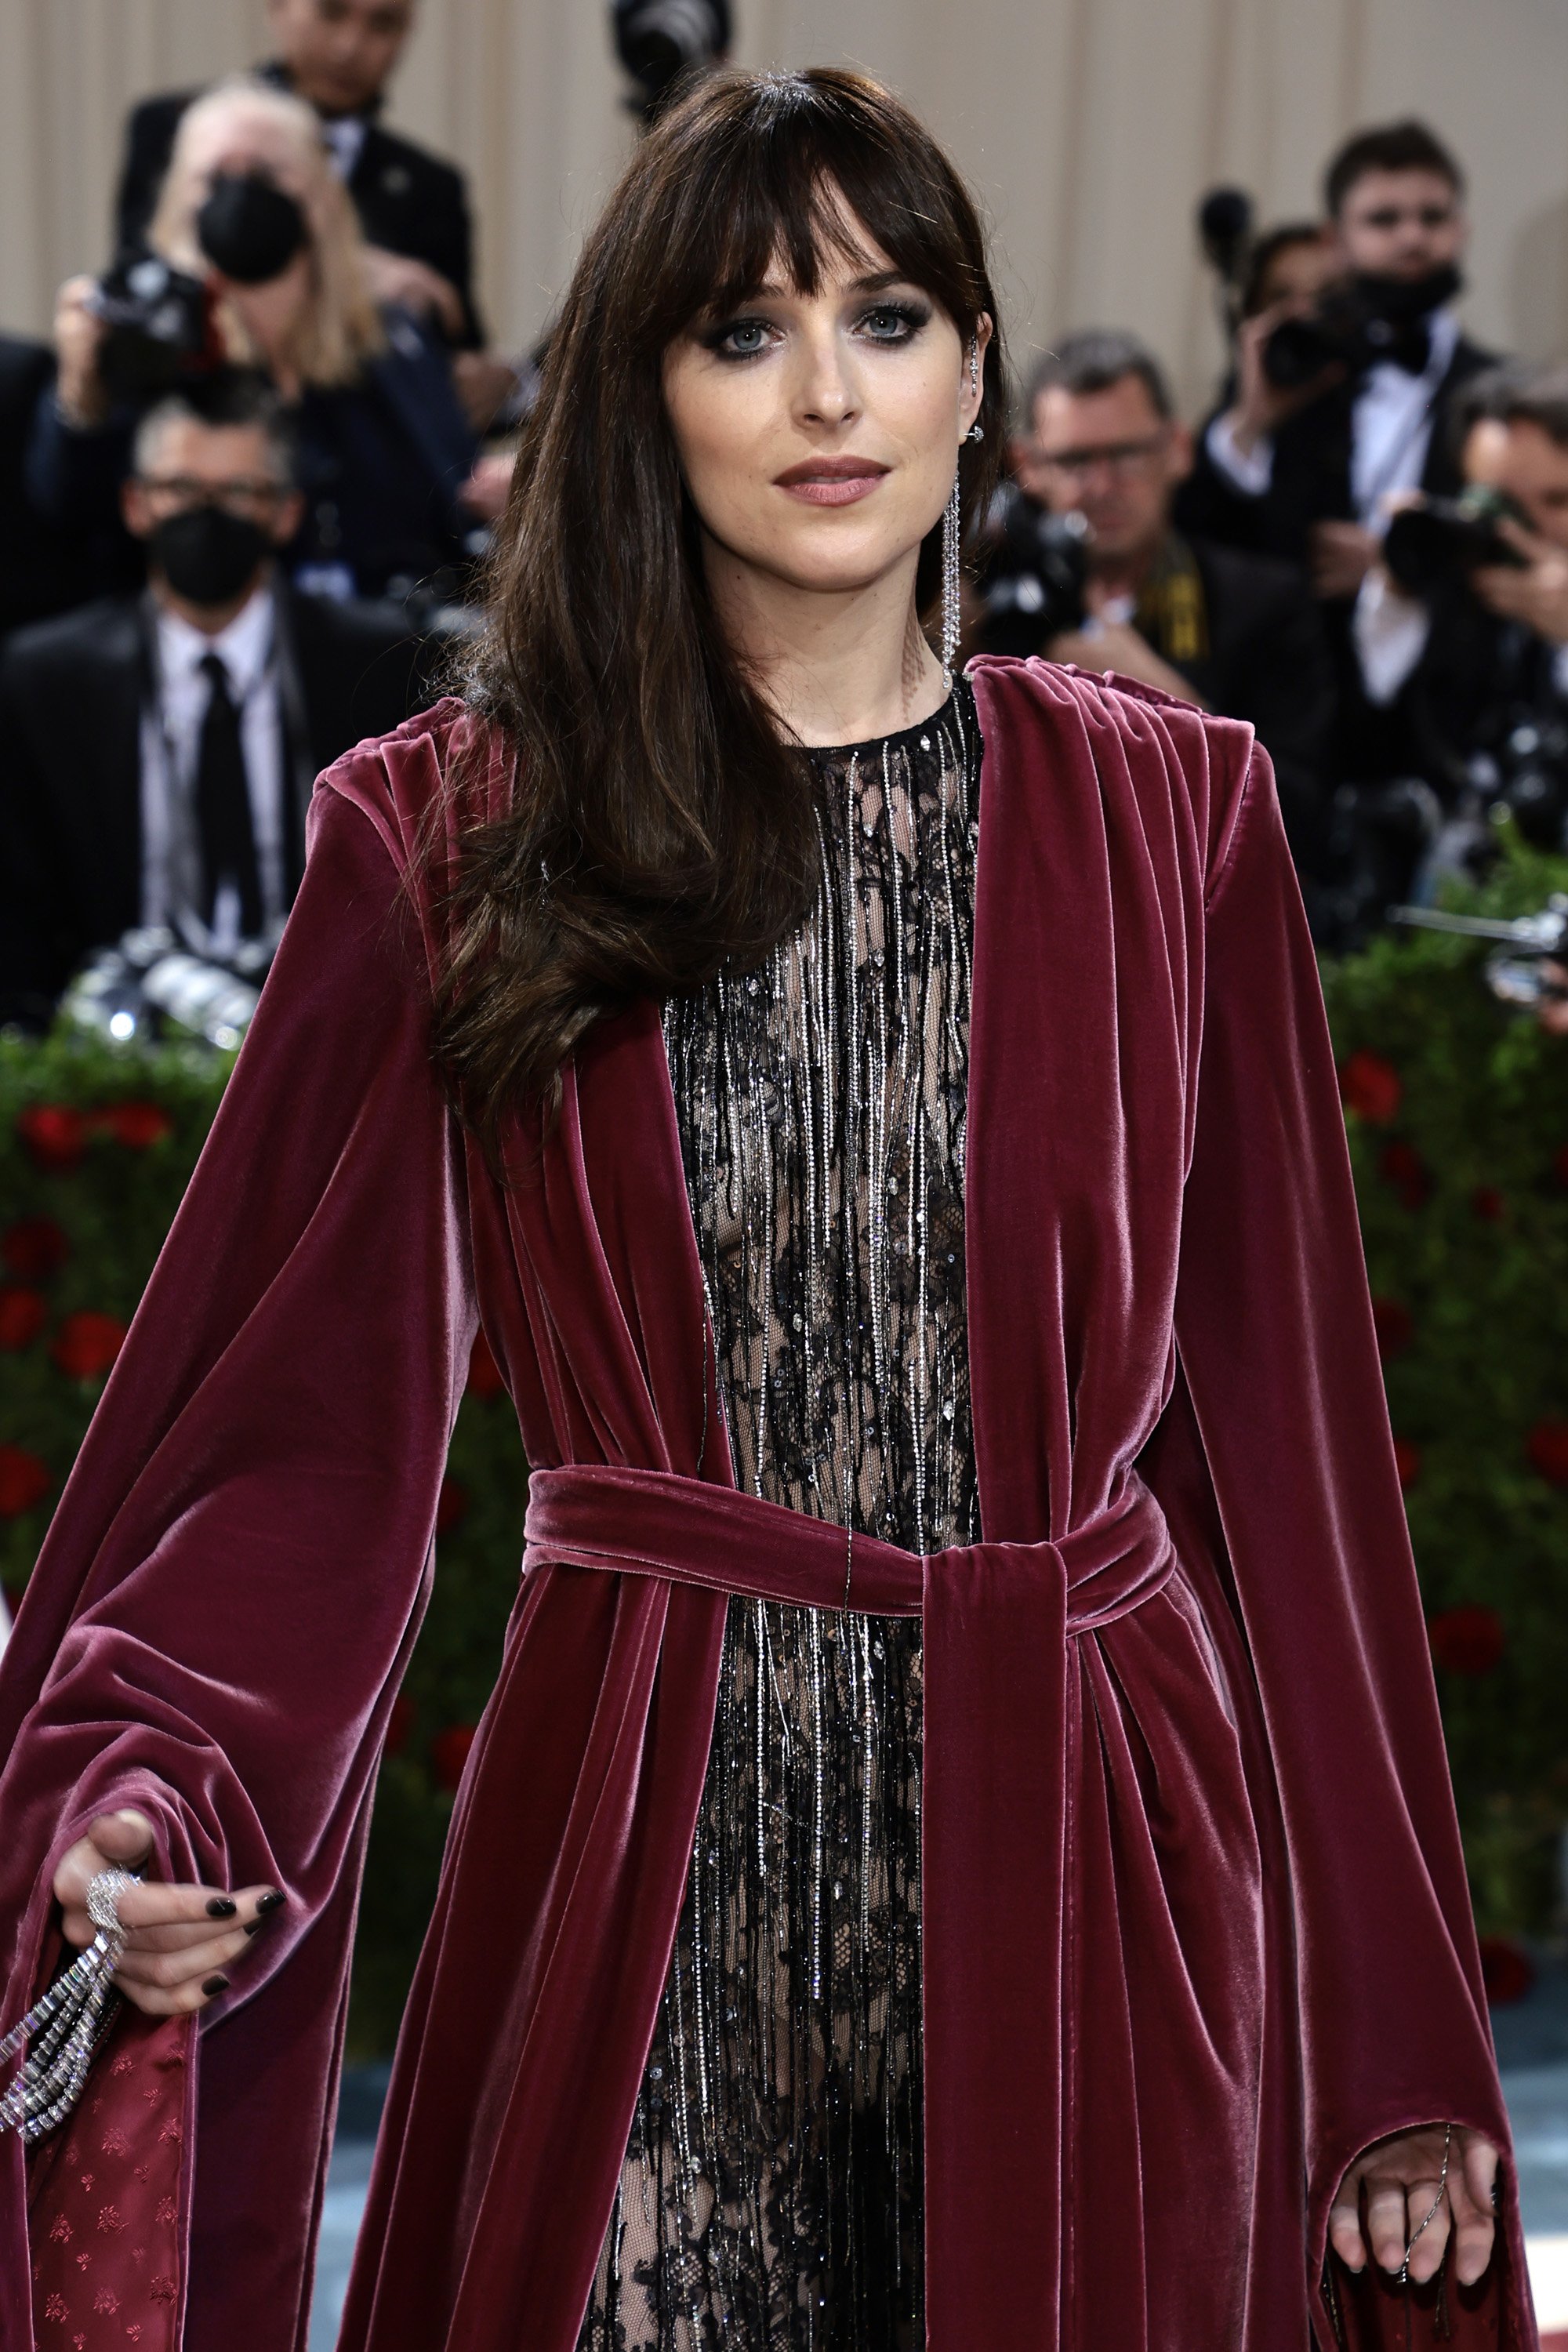 Dakota Johnson at the 2022 Met Gala on May 2, 2022 | Source: Getty Images